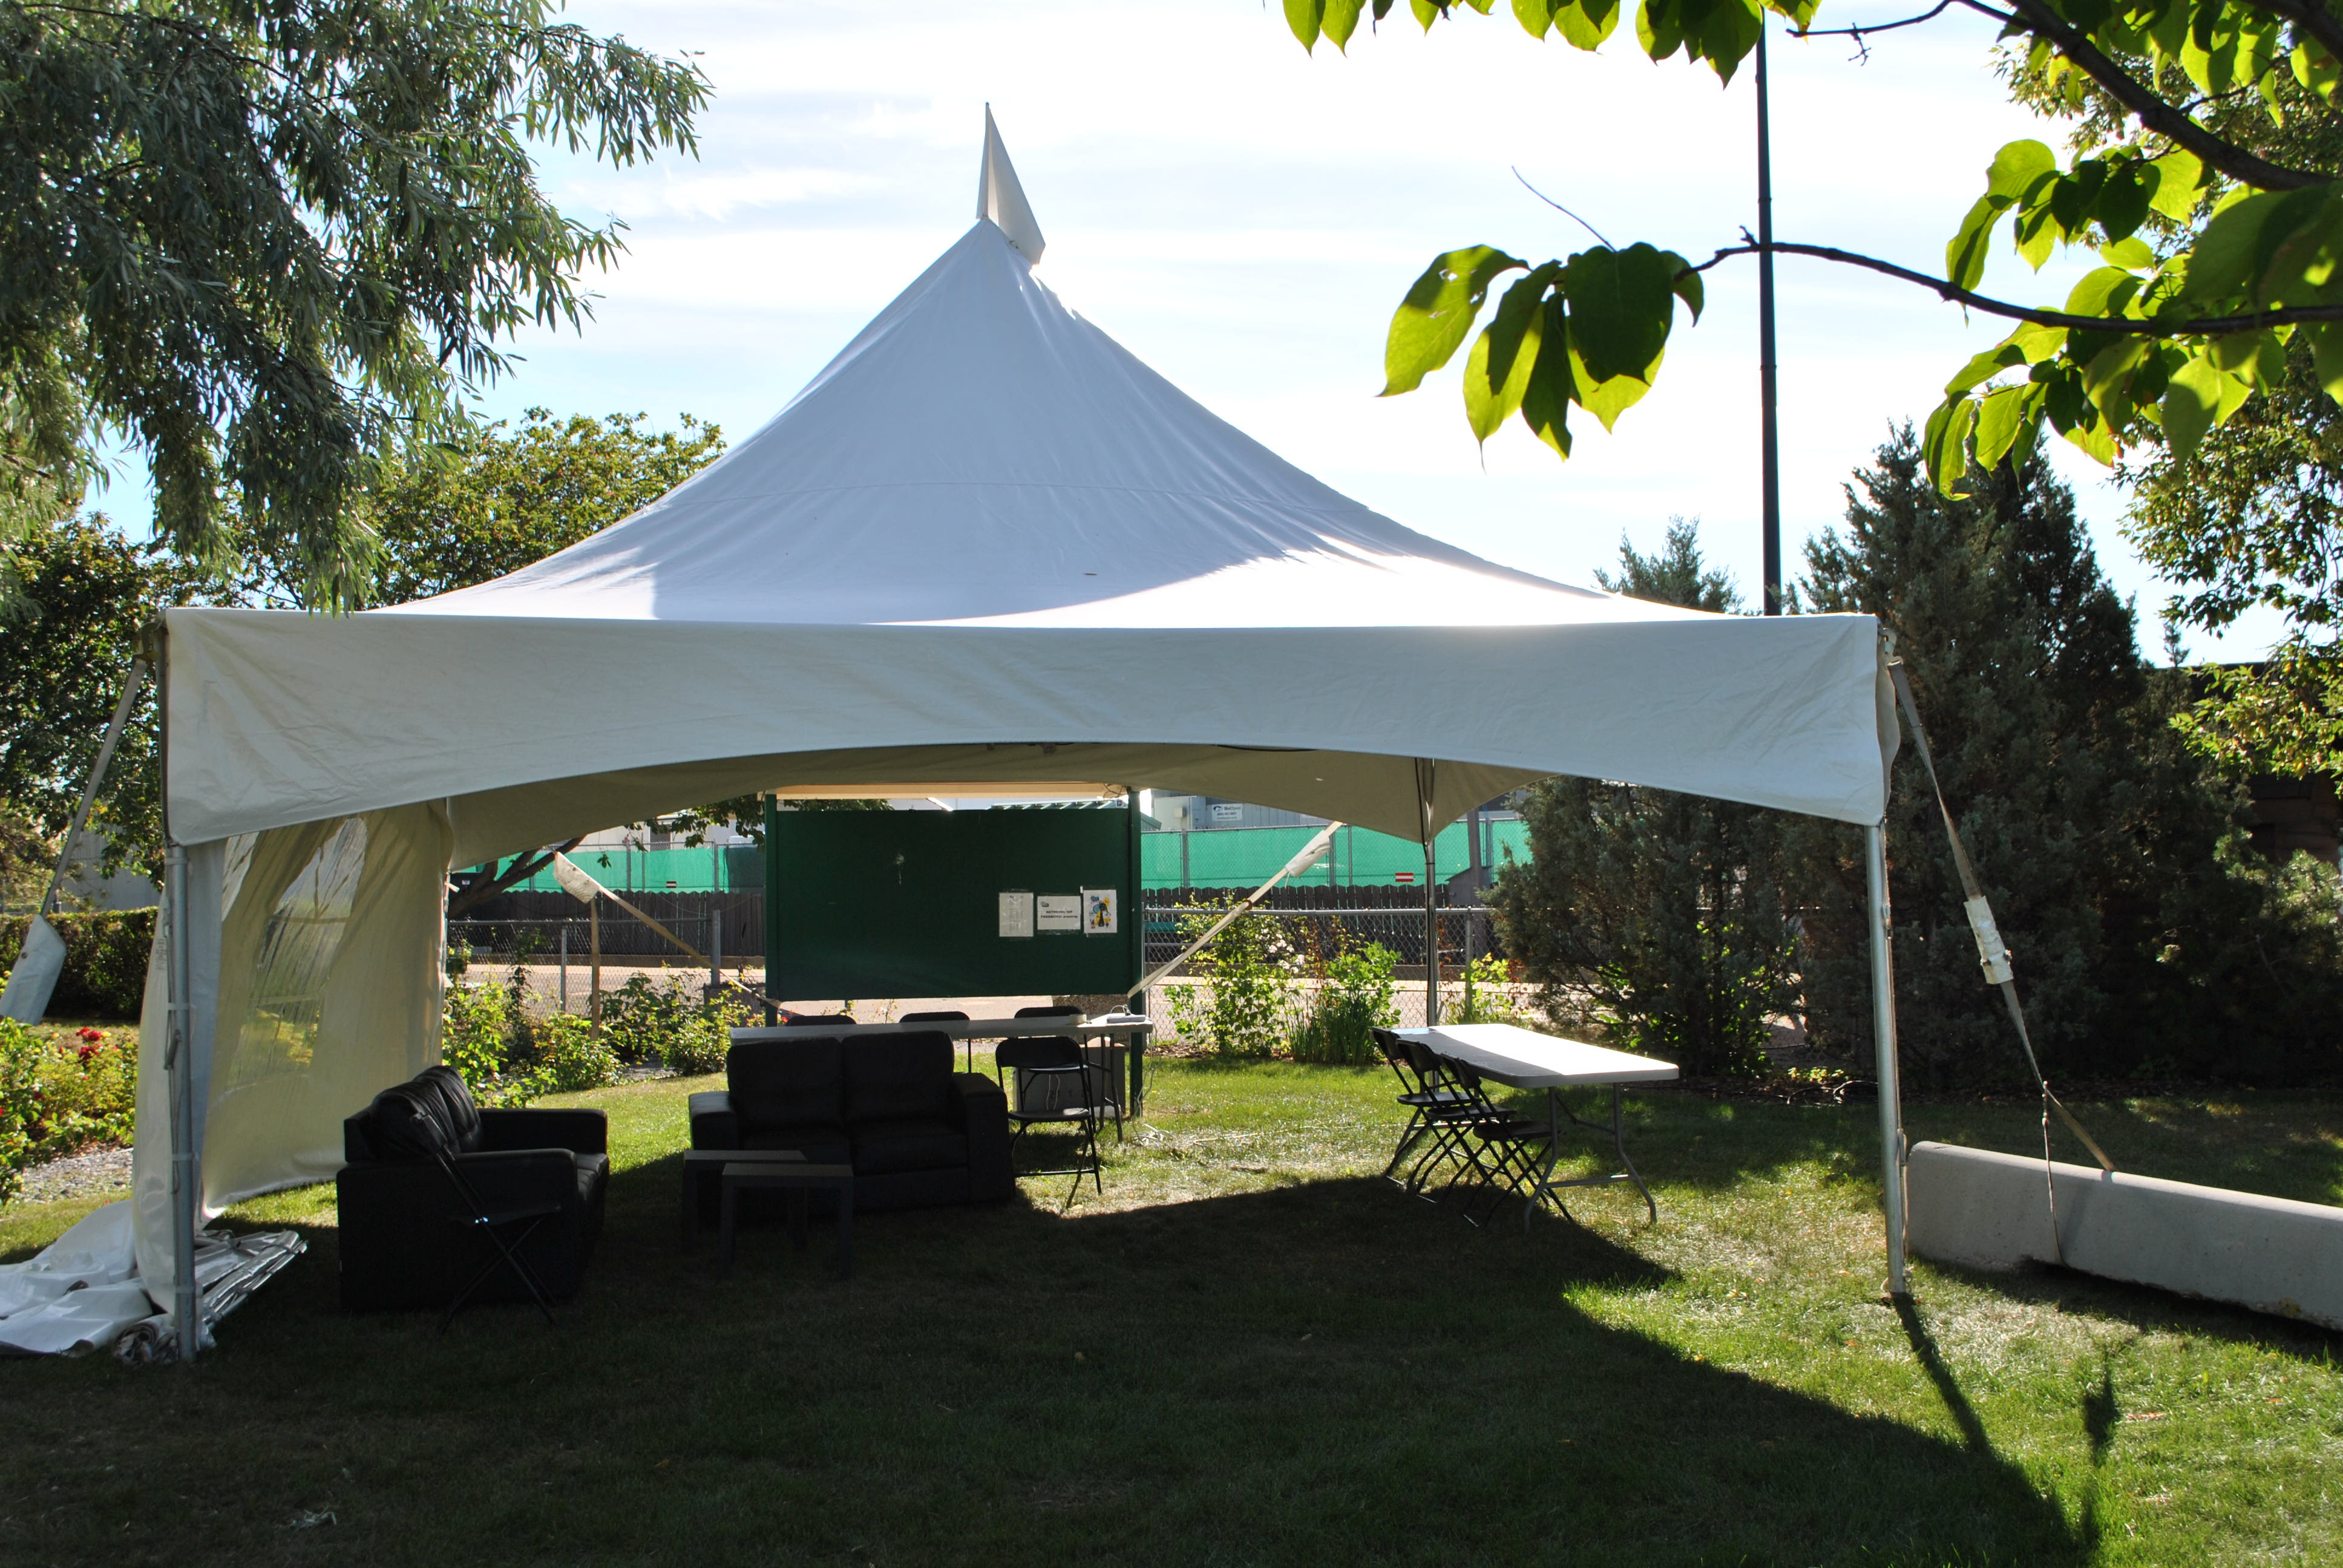 Marquee Tent, 20' x 20'